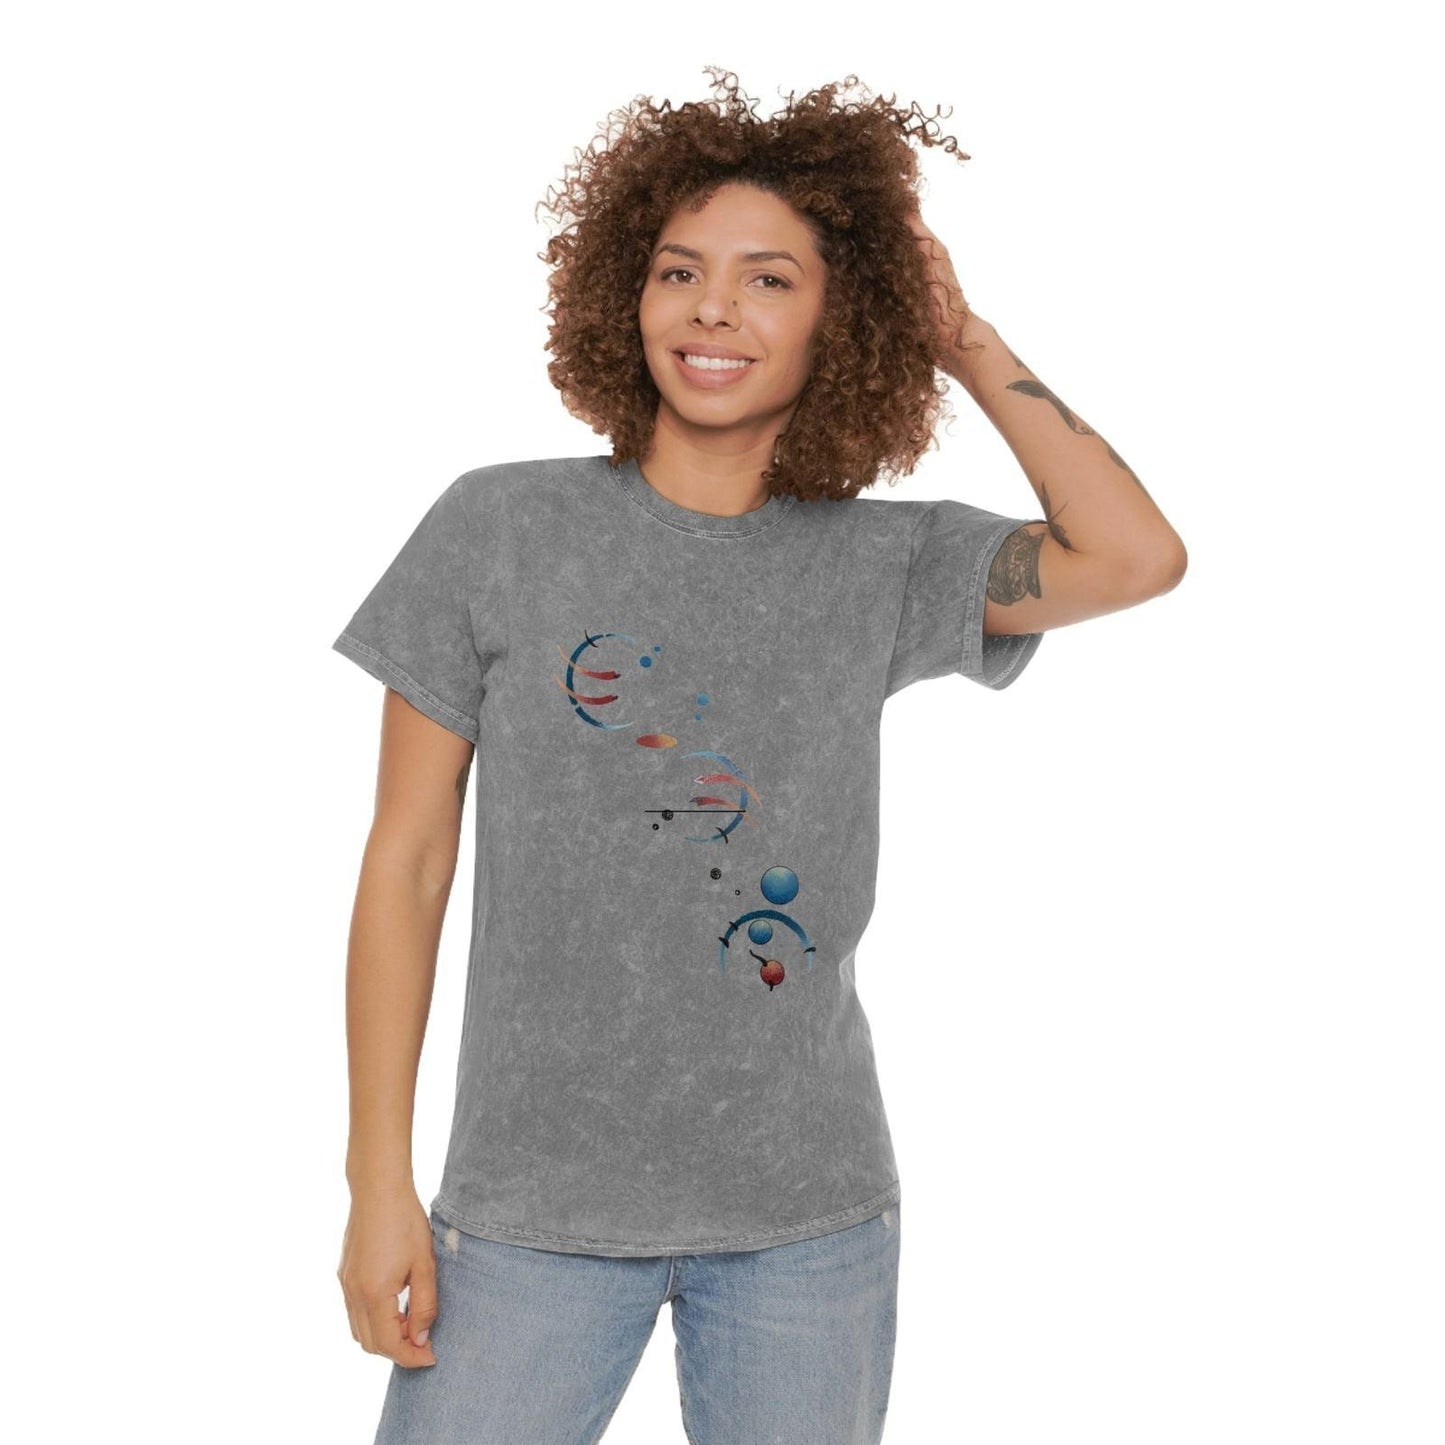 Unisex Mineral Wash T - Shirt tailwinds - Steel Pony